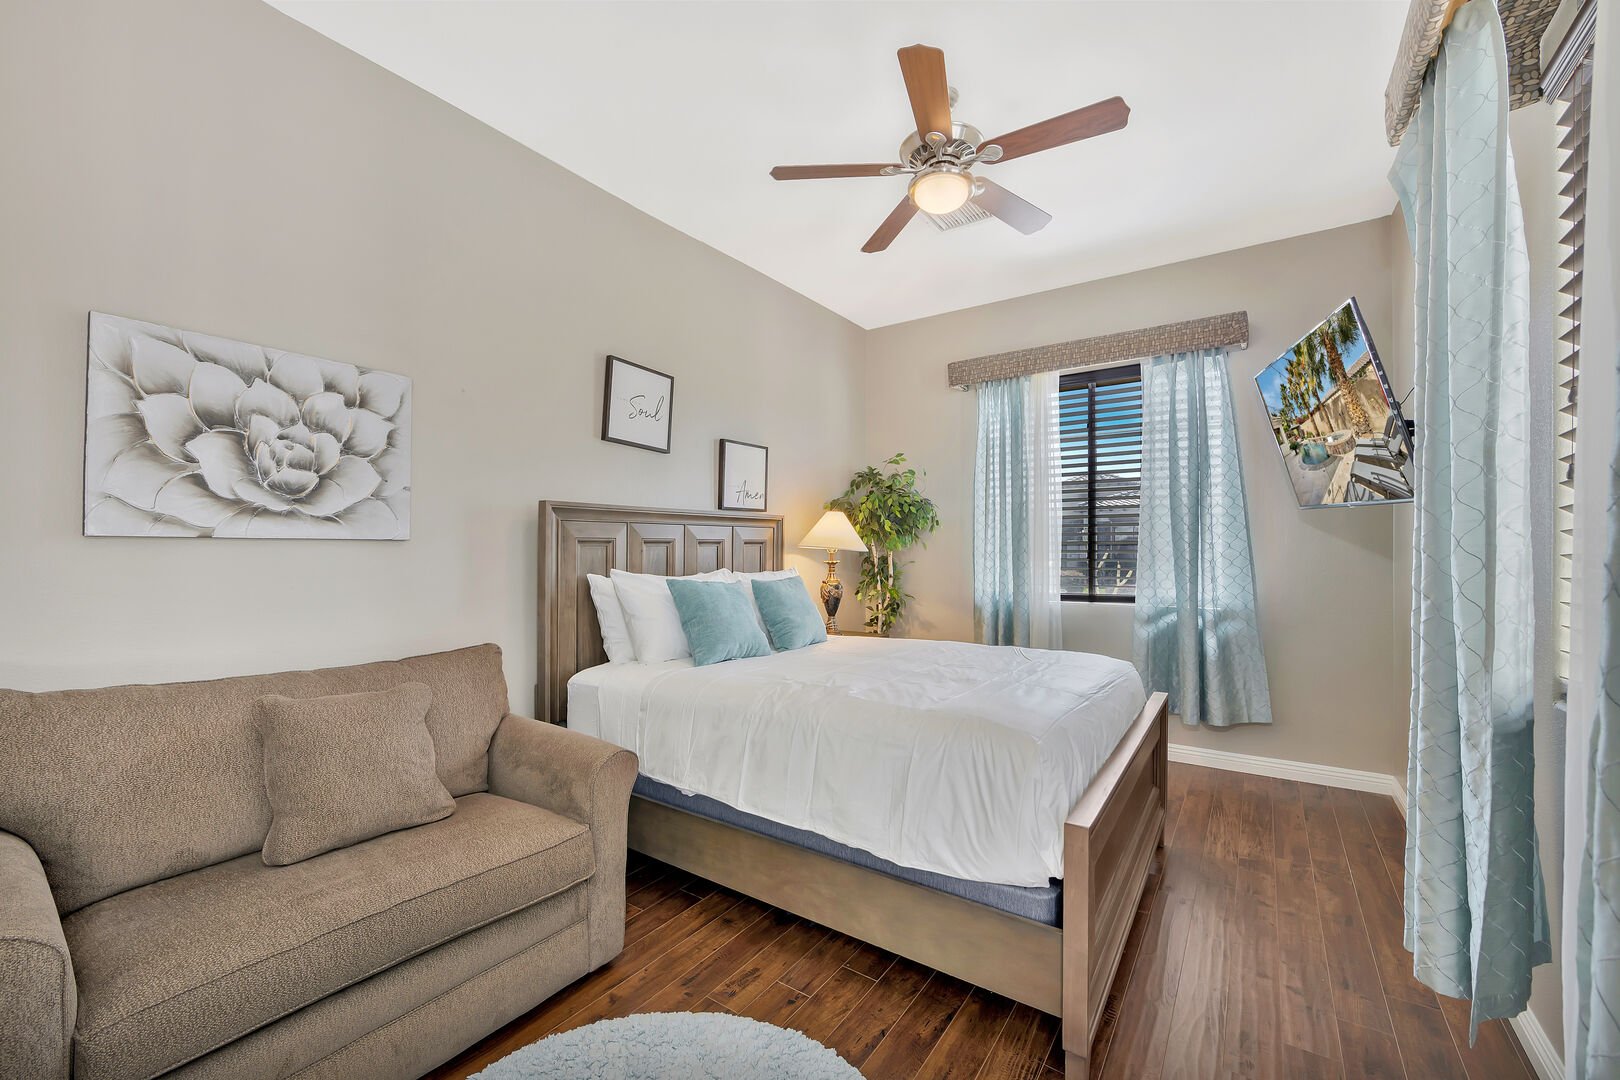 Casita Suite 3 features a Full-sized bed, Twin-Sized Sofa Sleeper, 55-inch TCL Smart Television, and ceiling fan.